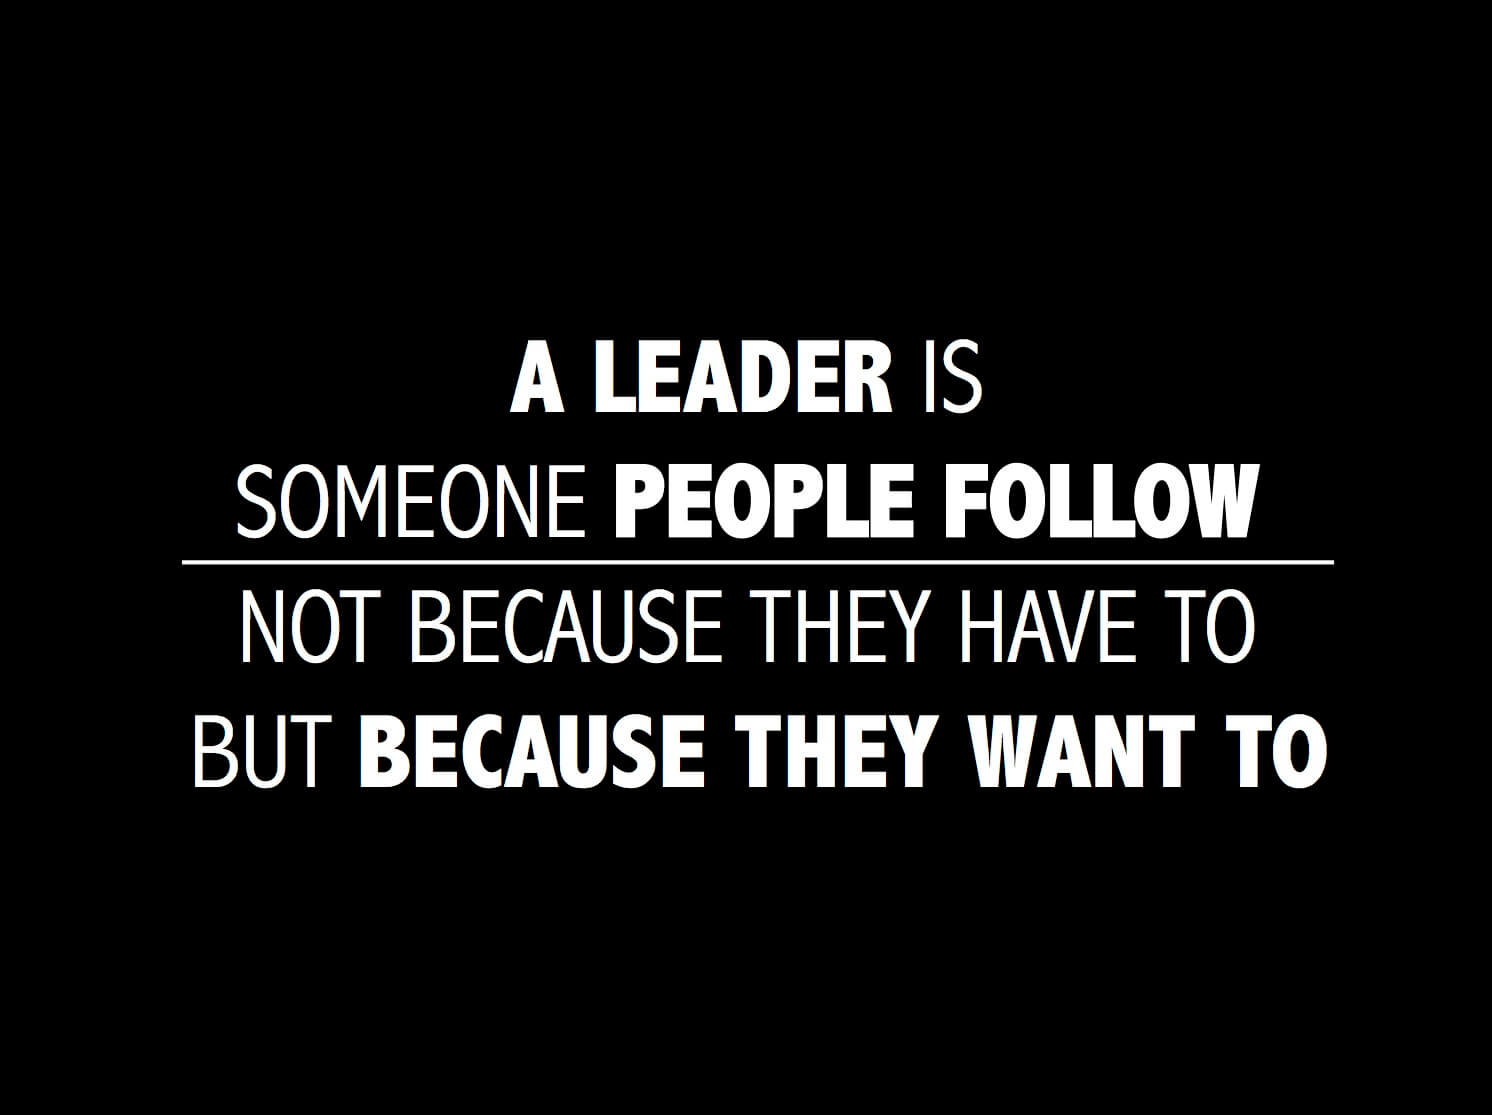 A Leader is Someone People Follow